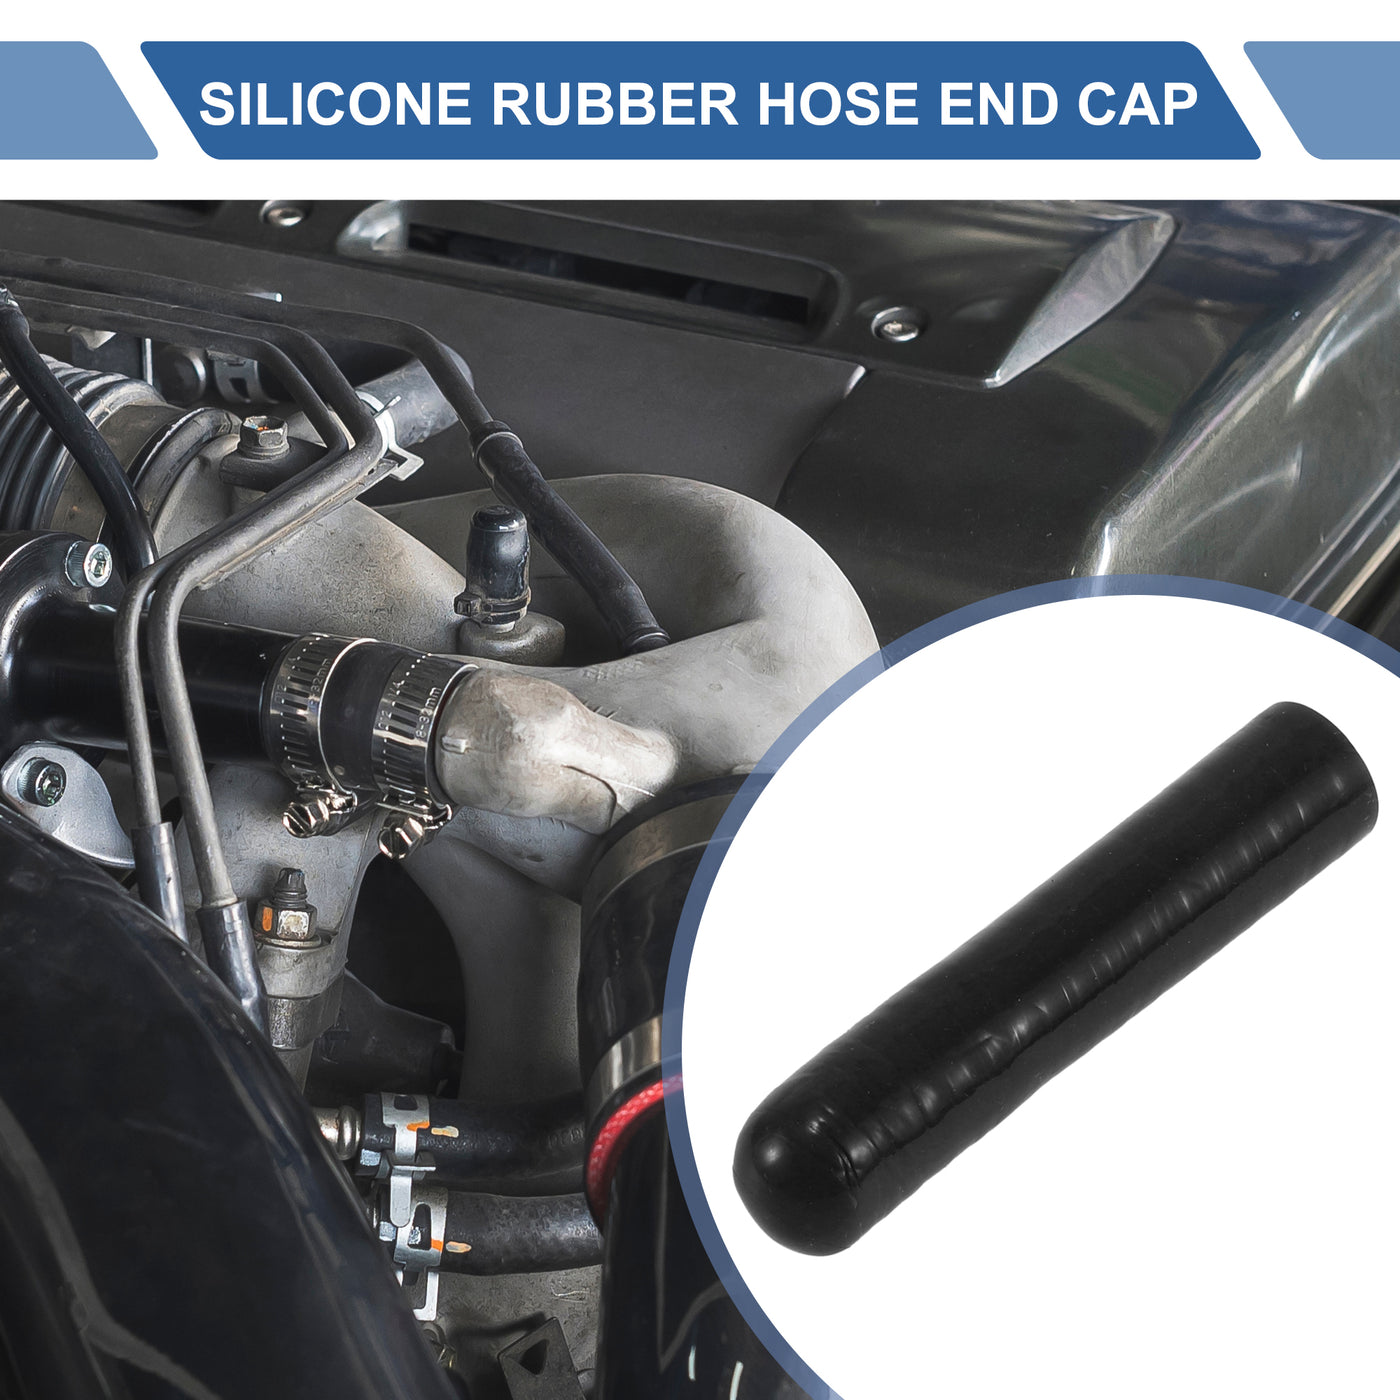 X AUTOHAUX 1 Pcs 60mm Length 6mm/0.24" ID Black Car Silicone Rubber Hose End Cap with Clamp Silicone Reinforced Blanking Cap for Bypass Tube Universal